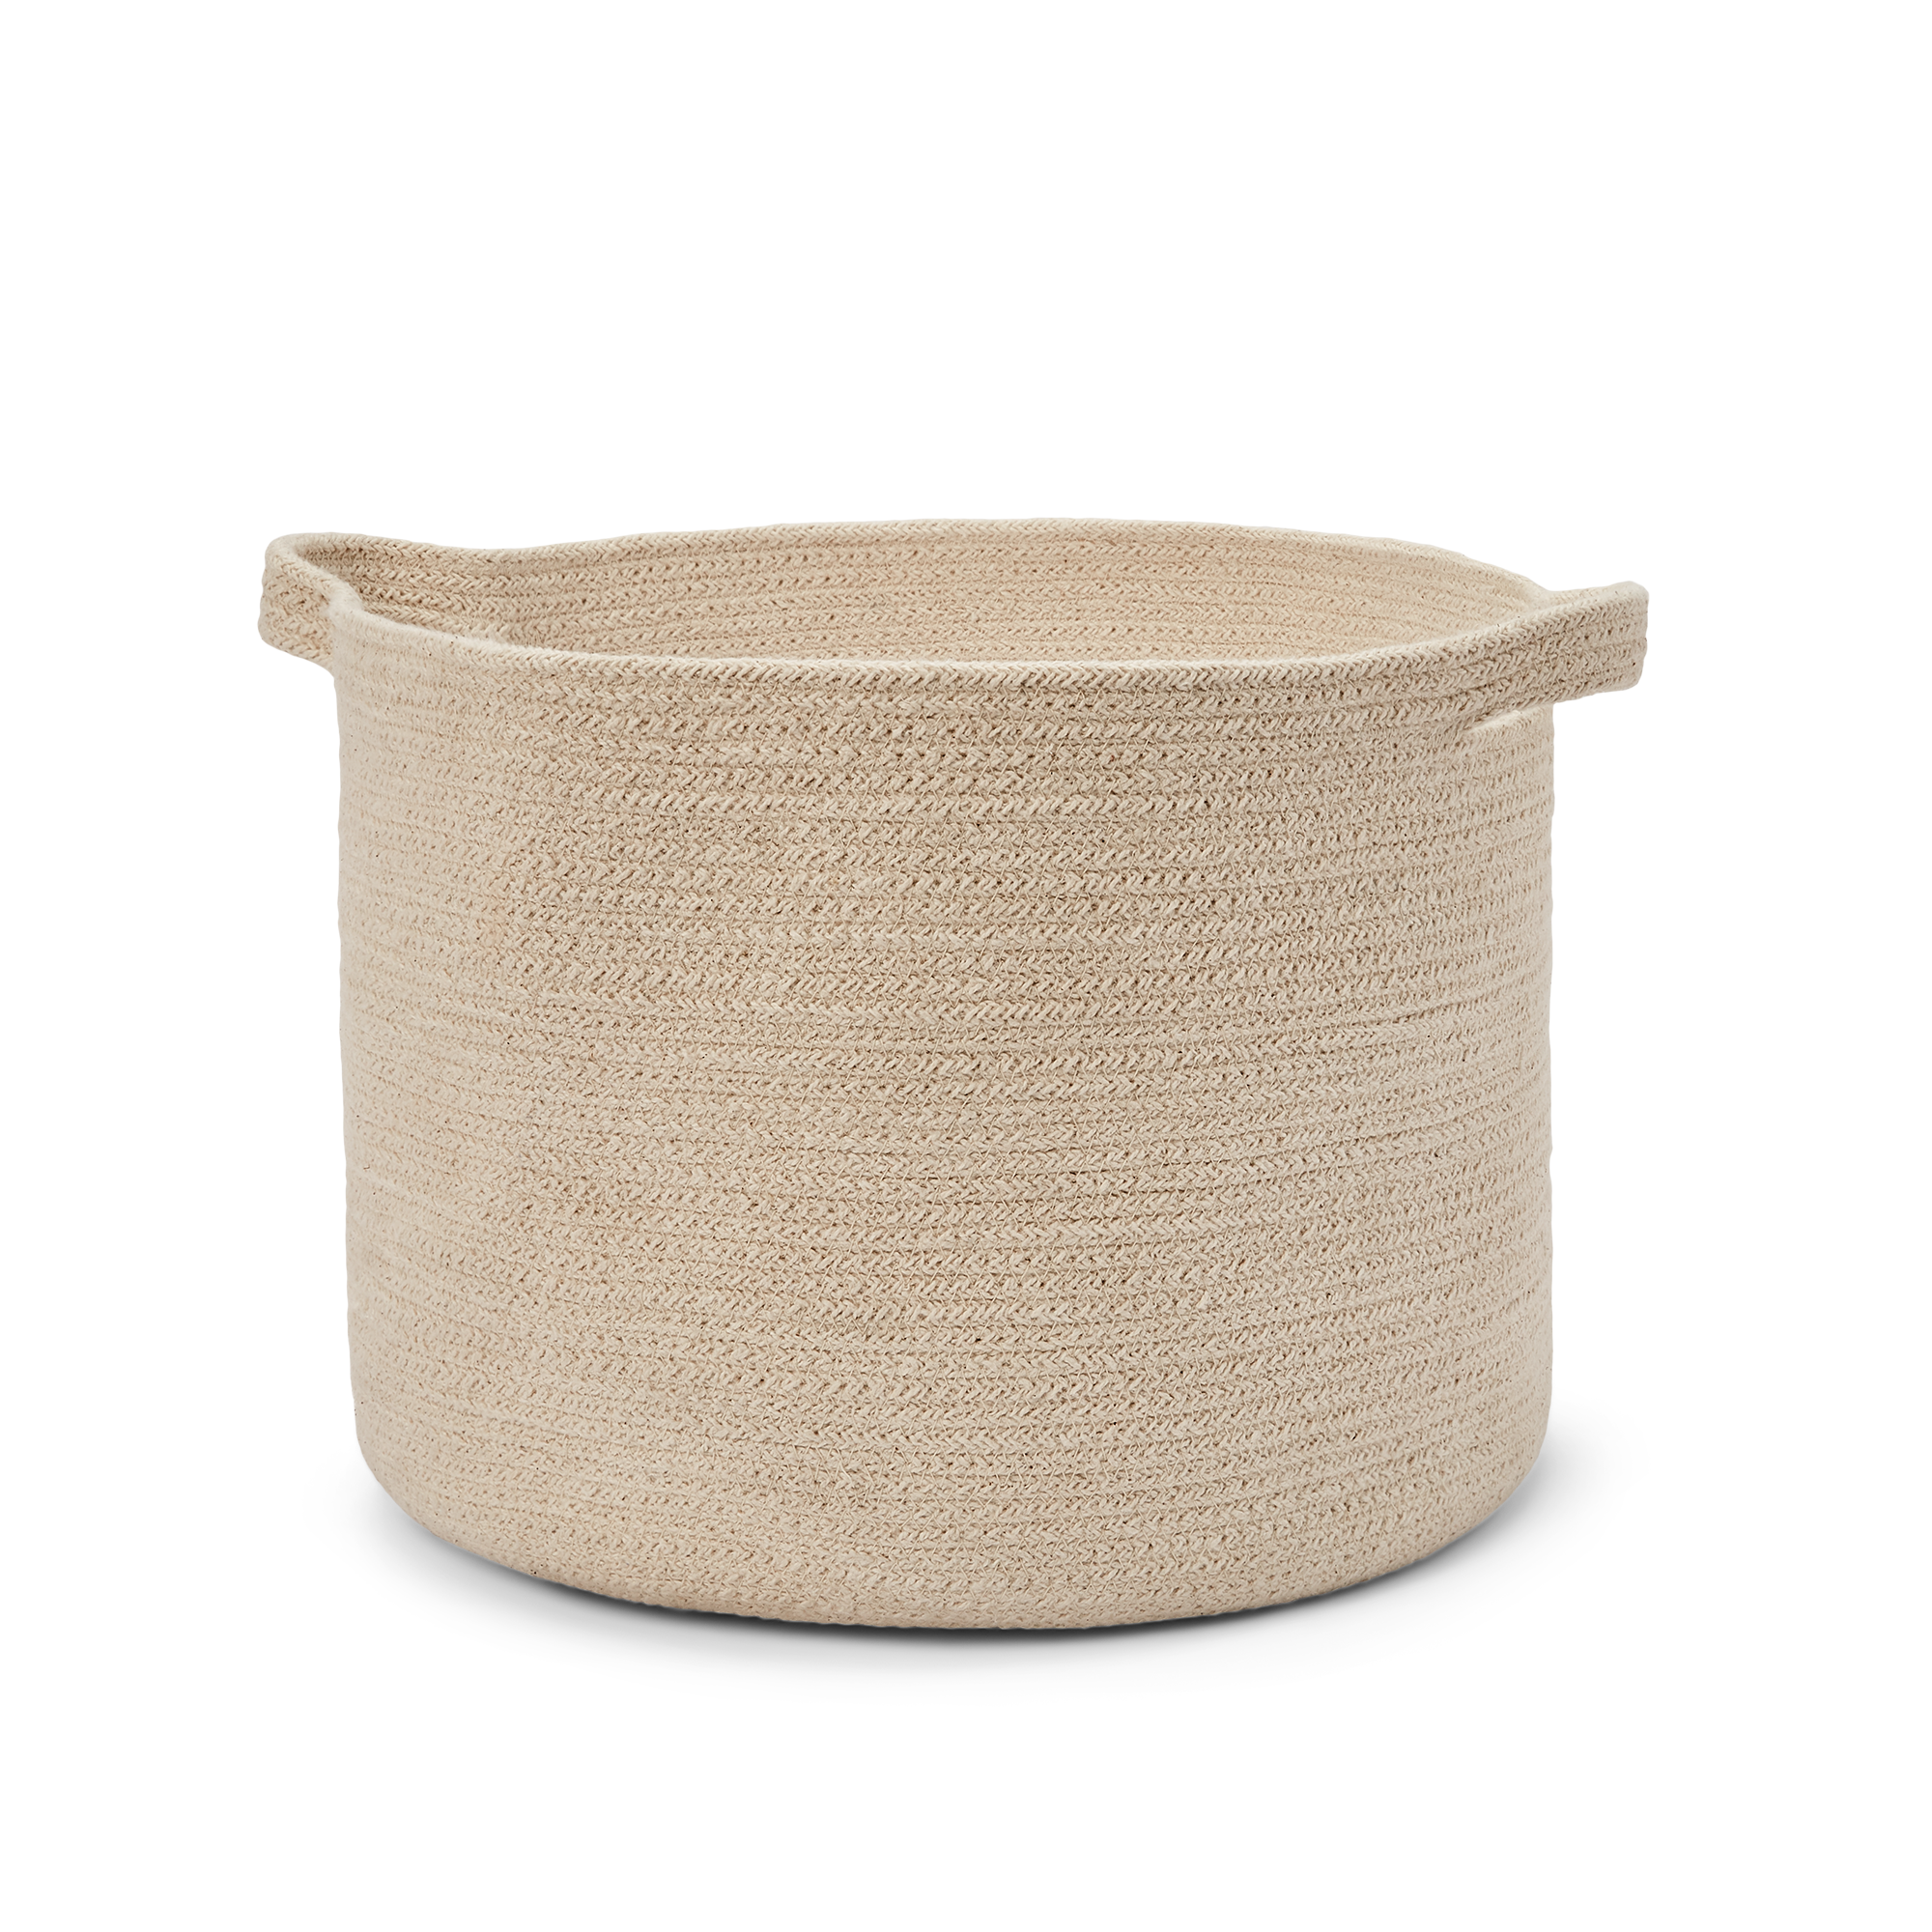 Side view, medium size fern organic cotton basket with handles, in natural cotton color.